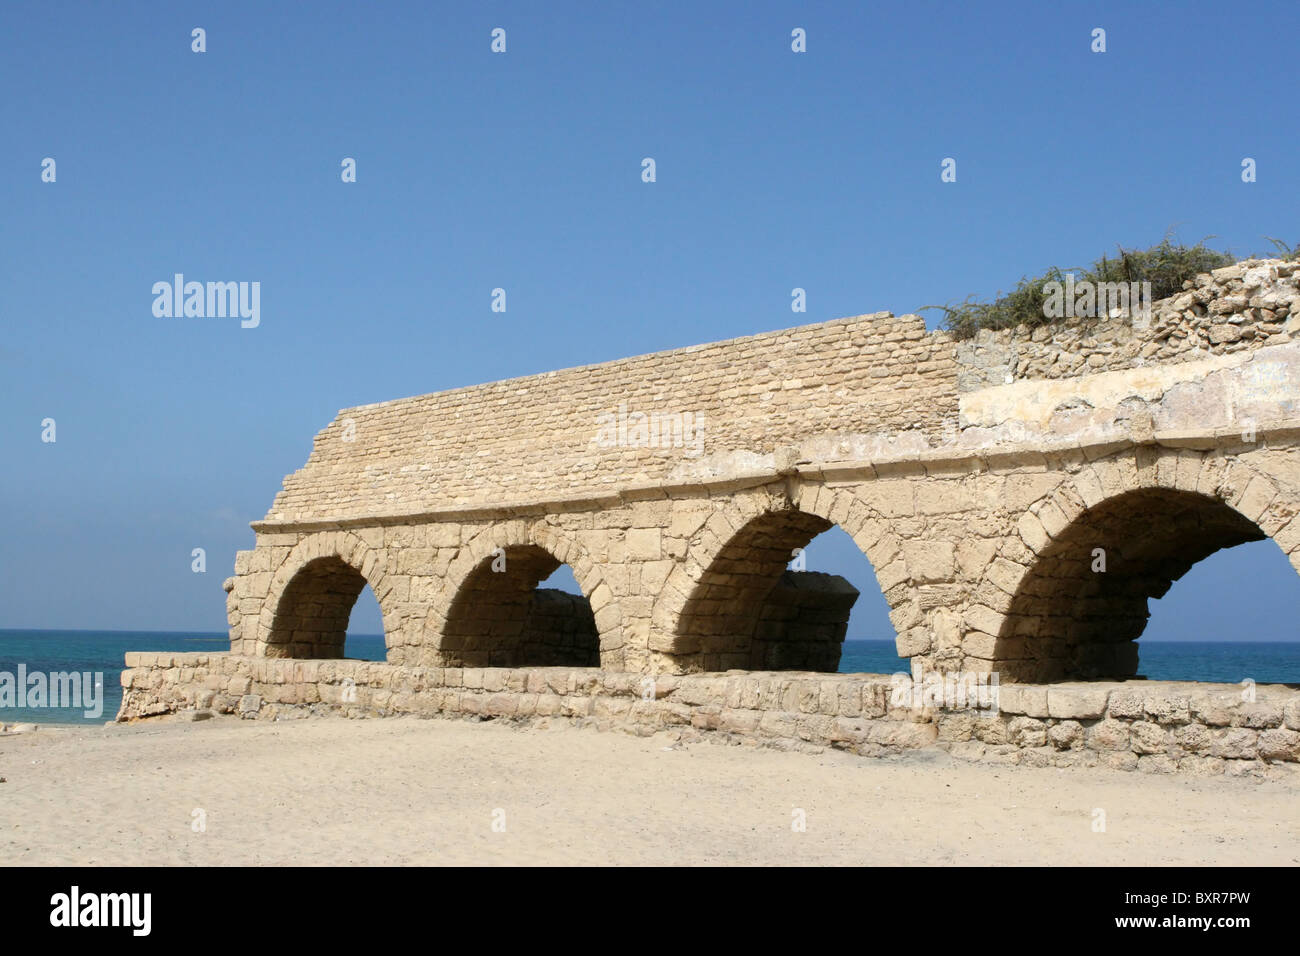 Ruins of an ancient Roman aqueduct were build by the Mediterranean Sea. They were used to transport water from distant mountains Stock Photo